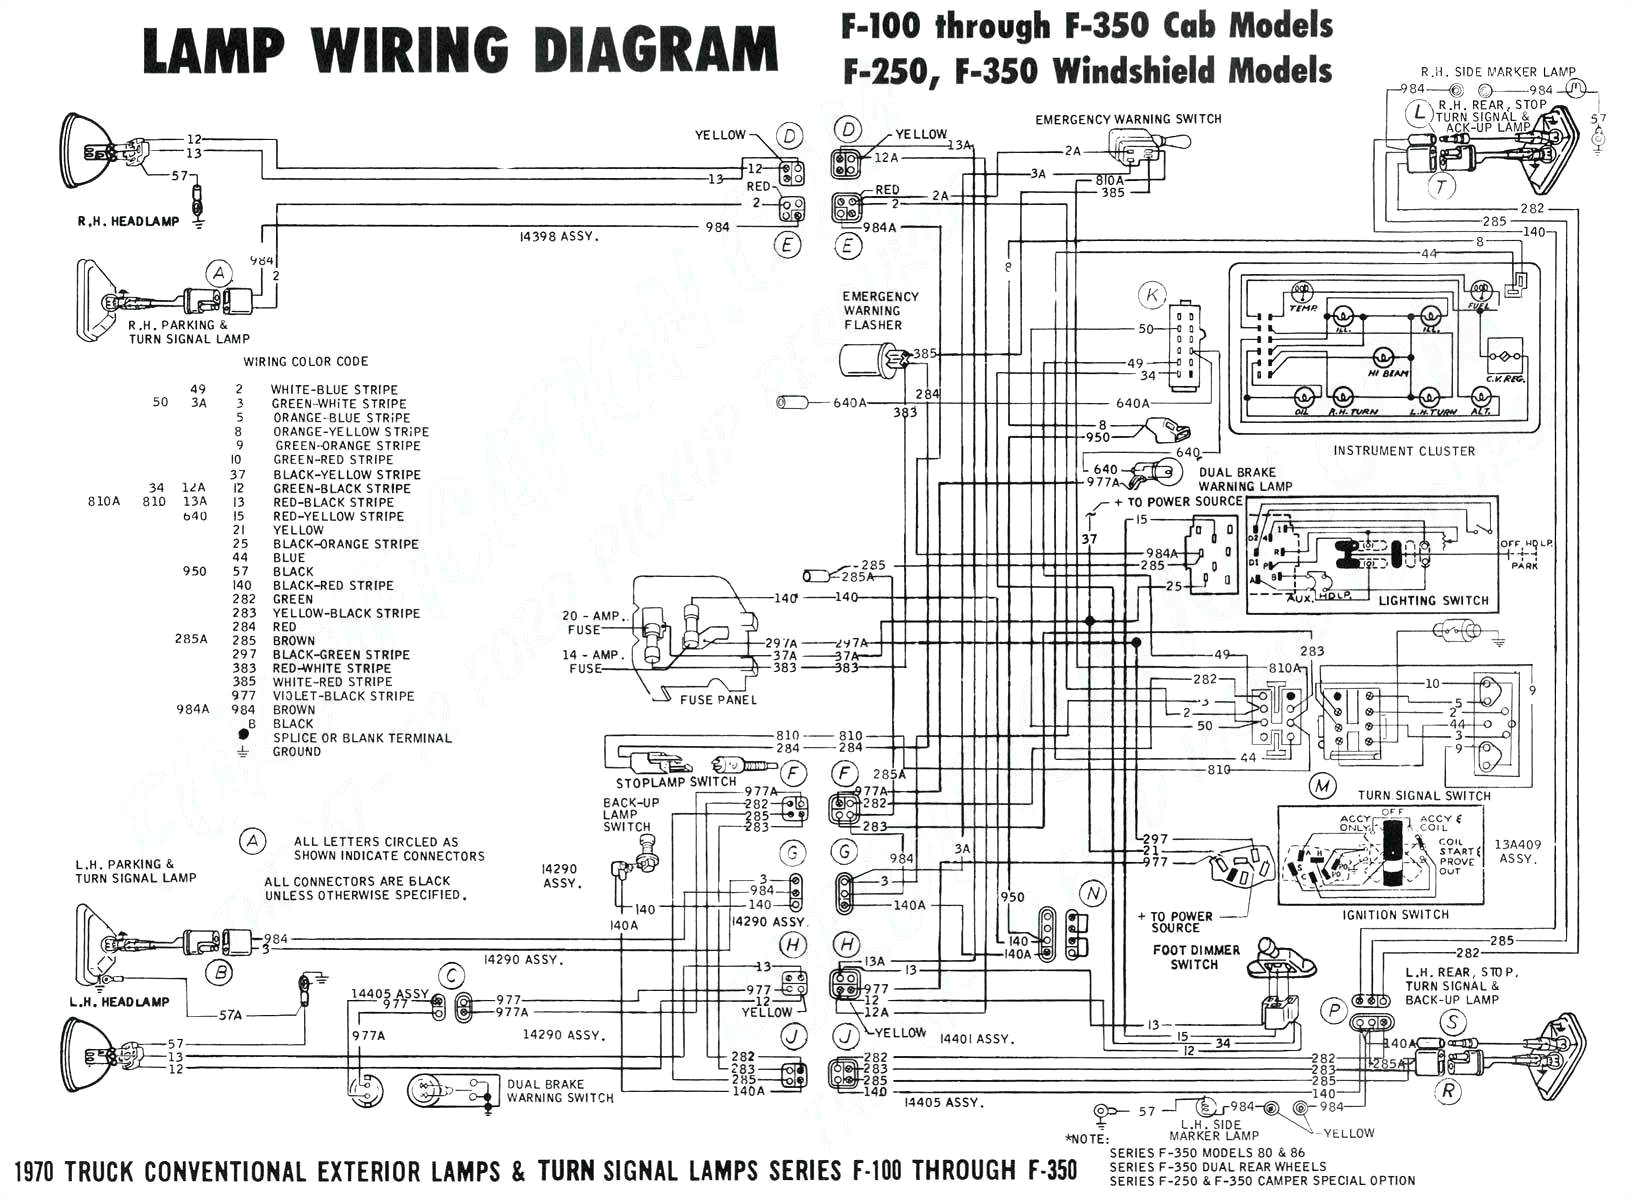 wiring a light fitting diagram wiring diagrams c2 ab myrons mopeds wiring diagram files of wiring a light fitting diagram jpg